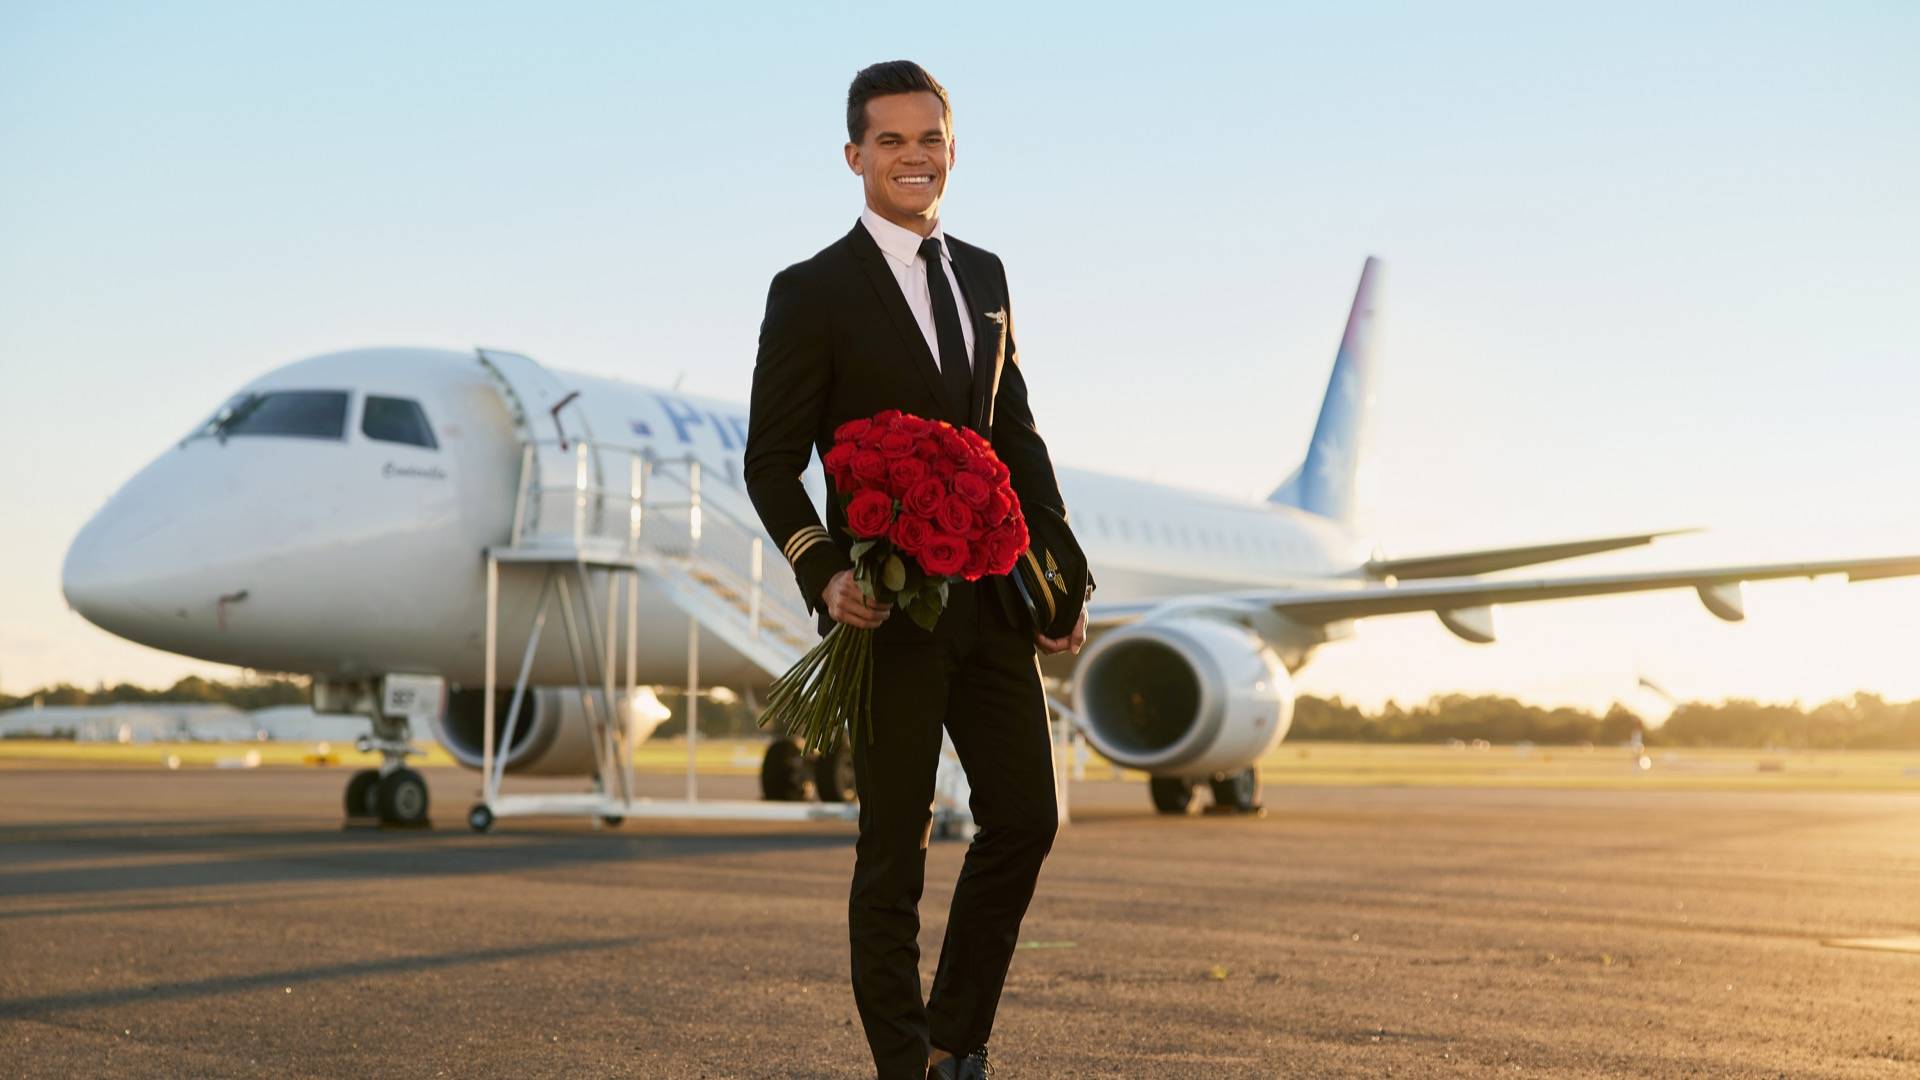 New Bachelor Jimmy Nicholson dressed in pilot's uniform and posing with bunch of red roses in front of aeroplane 